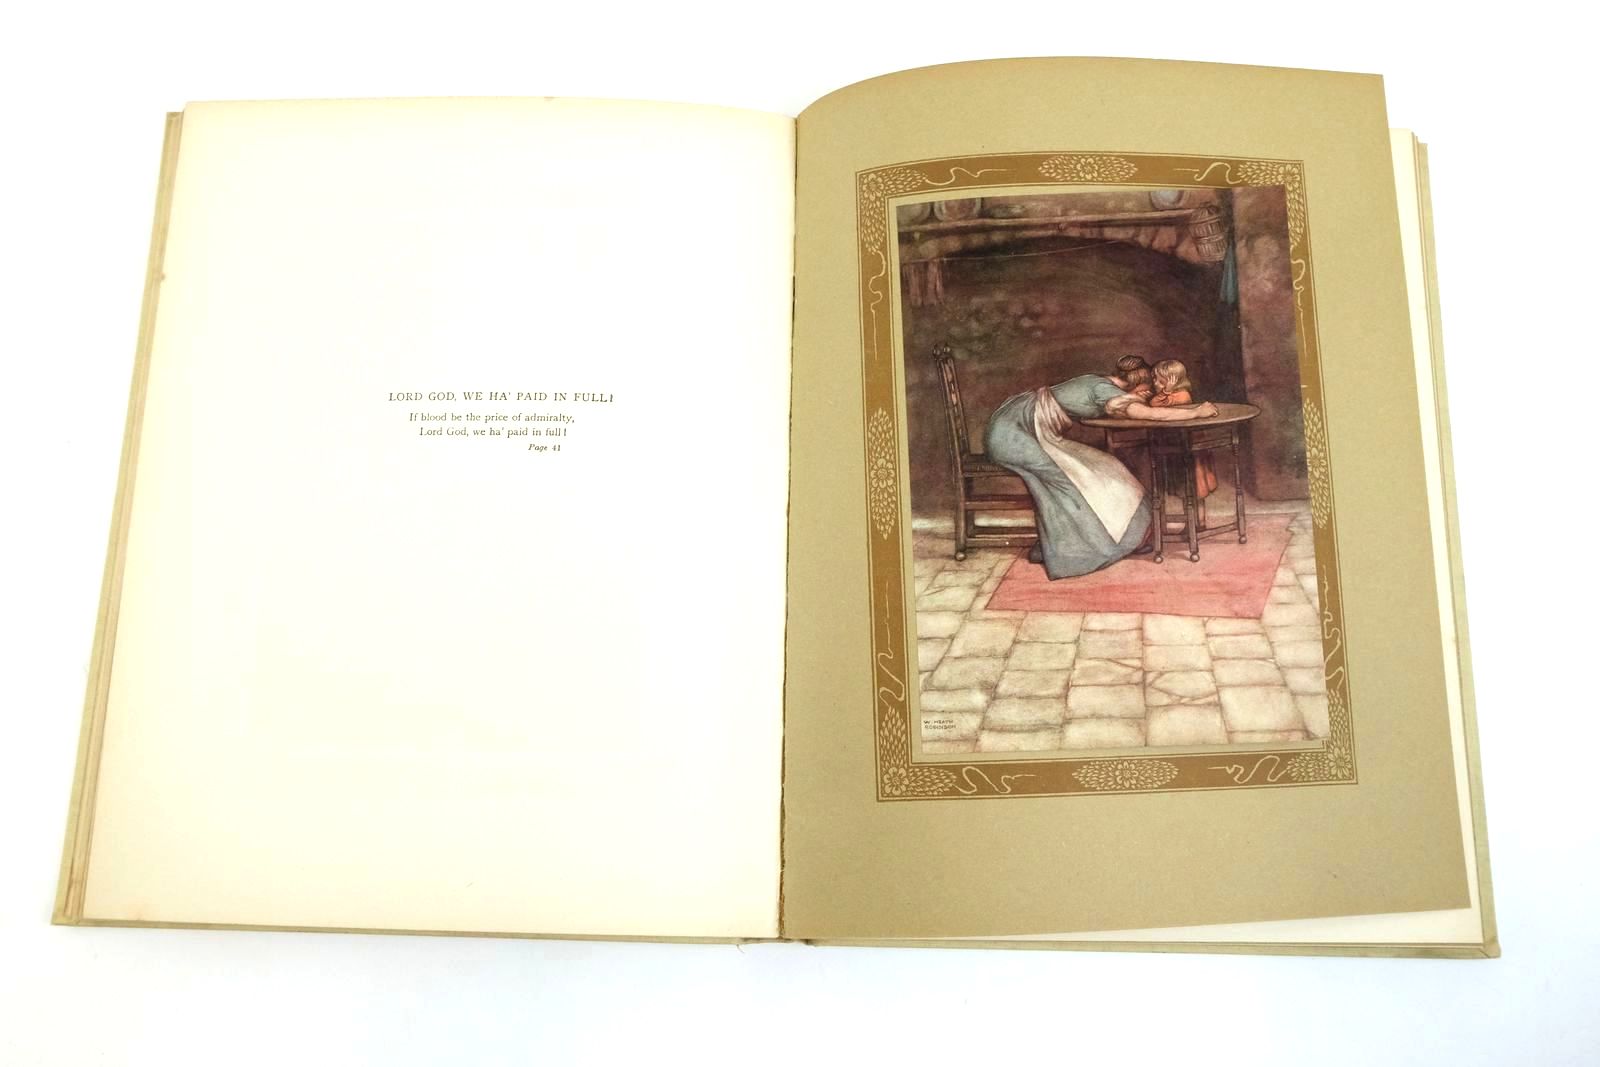 Photo of A SONG OF THE ENGLISH written by Kipling, Rudyard illustrated by Robinson, W. Heath published by Hodder & Stoughton (STOCK CODE: 1322239)  for sale by Stella & Rose's Books